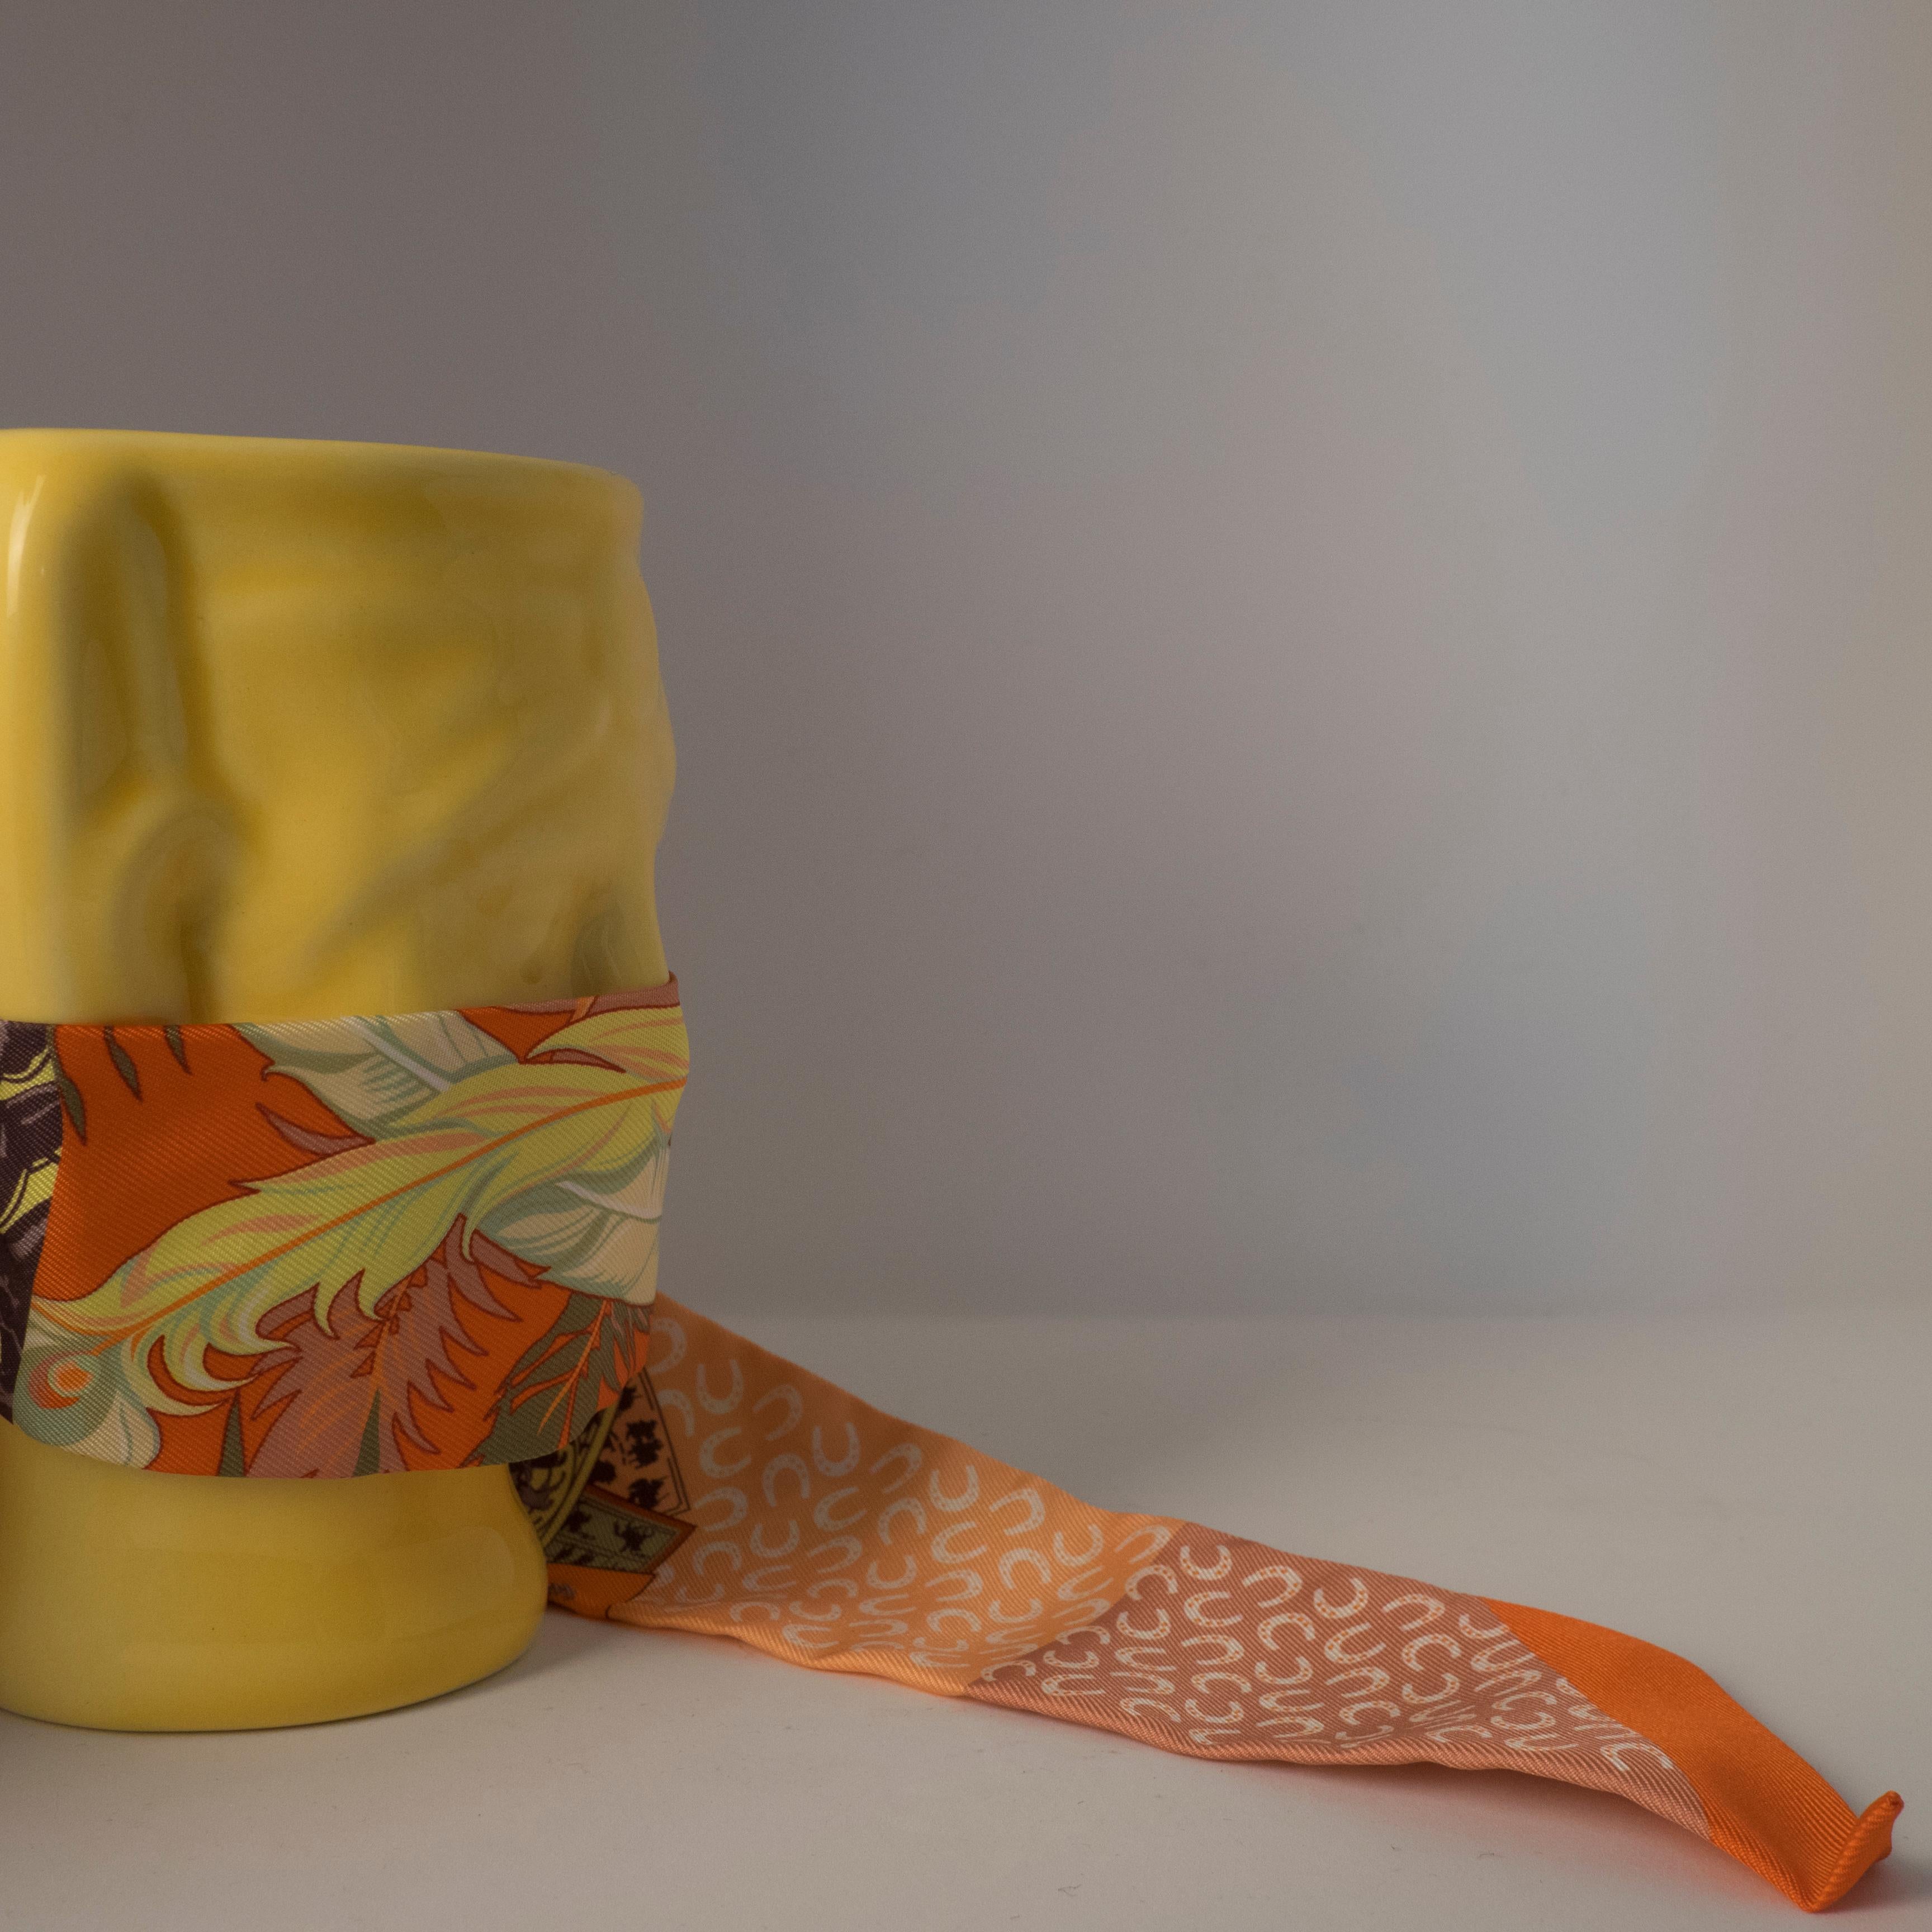 Modern 21st Century, Yellow Ceramic Vase Handmade Hand decorated Made in Italy 1 Piece  For Sale